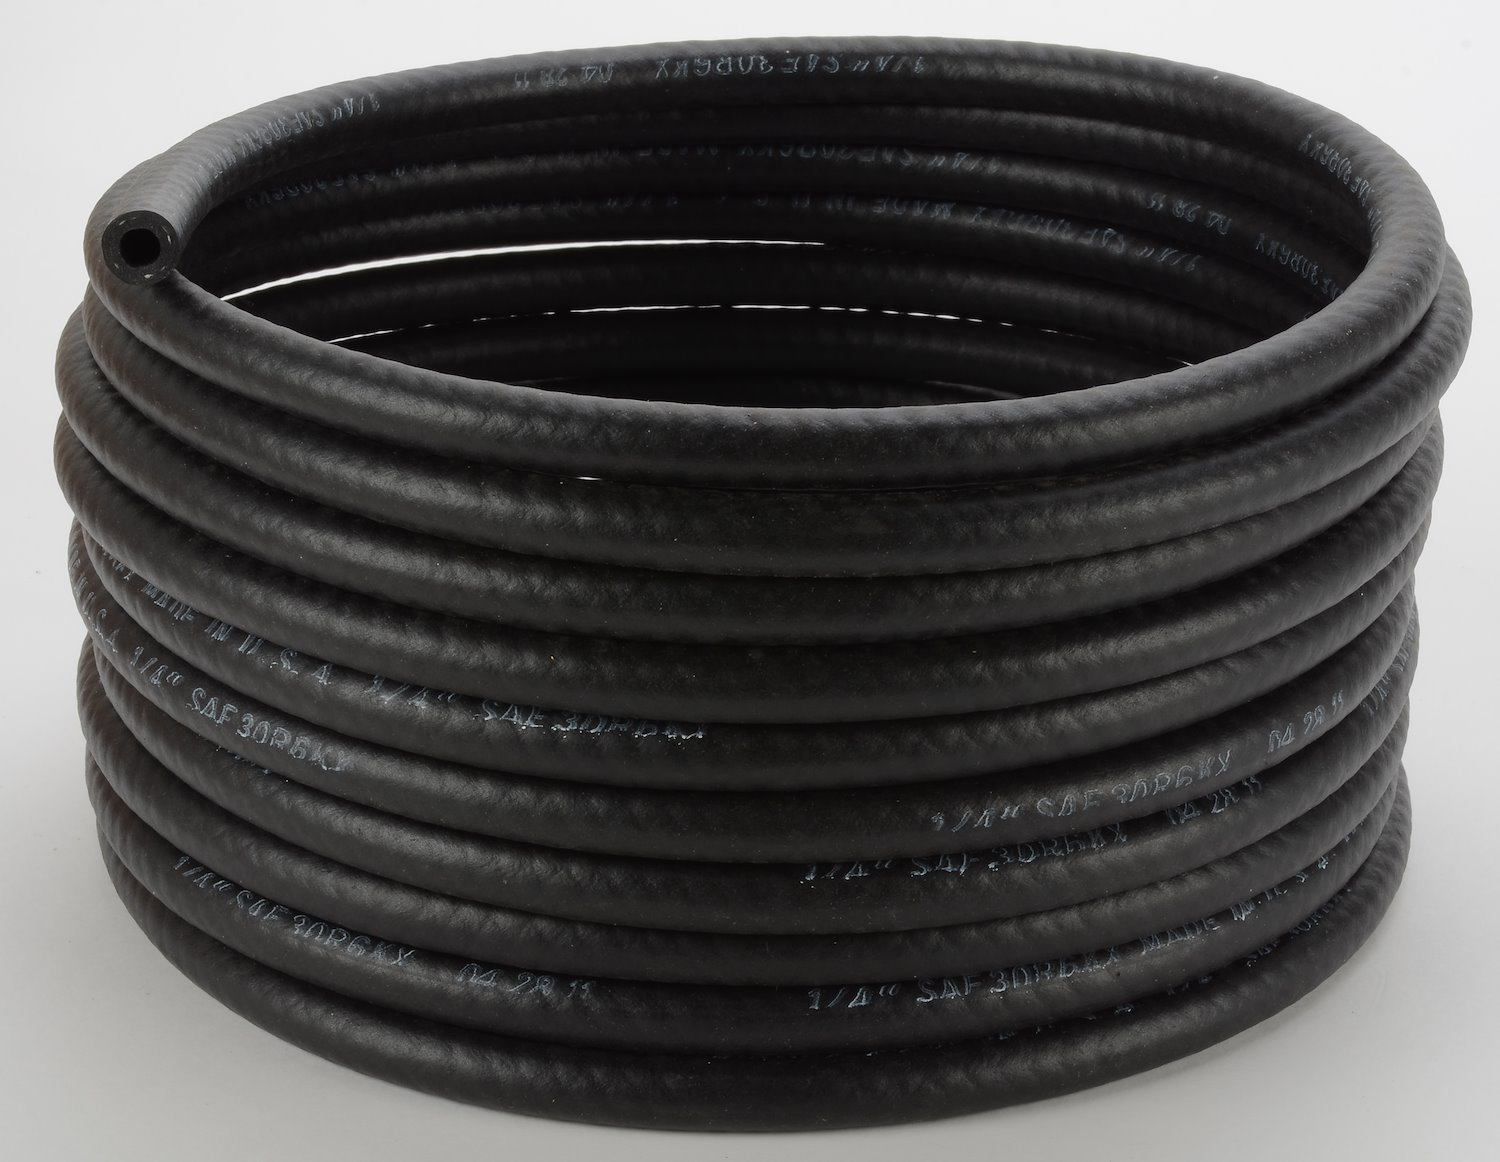 Universal Fuel Hose [1/4 in. I.D. x 25